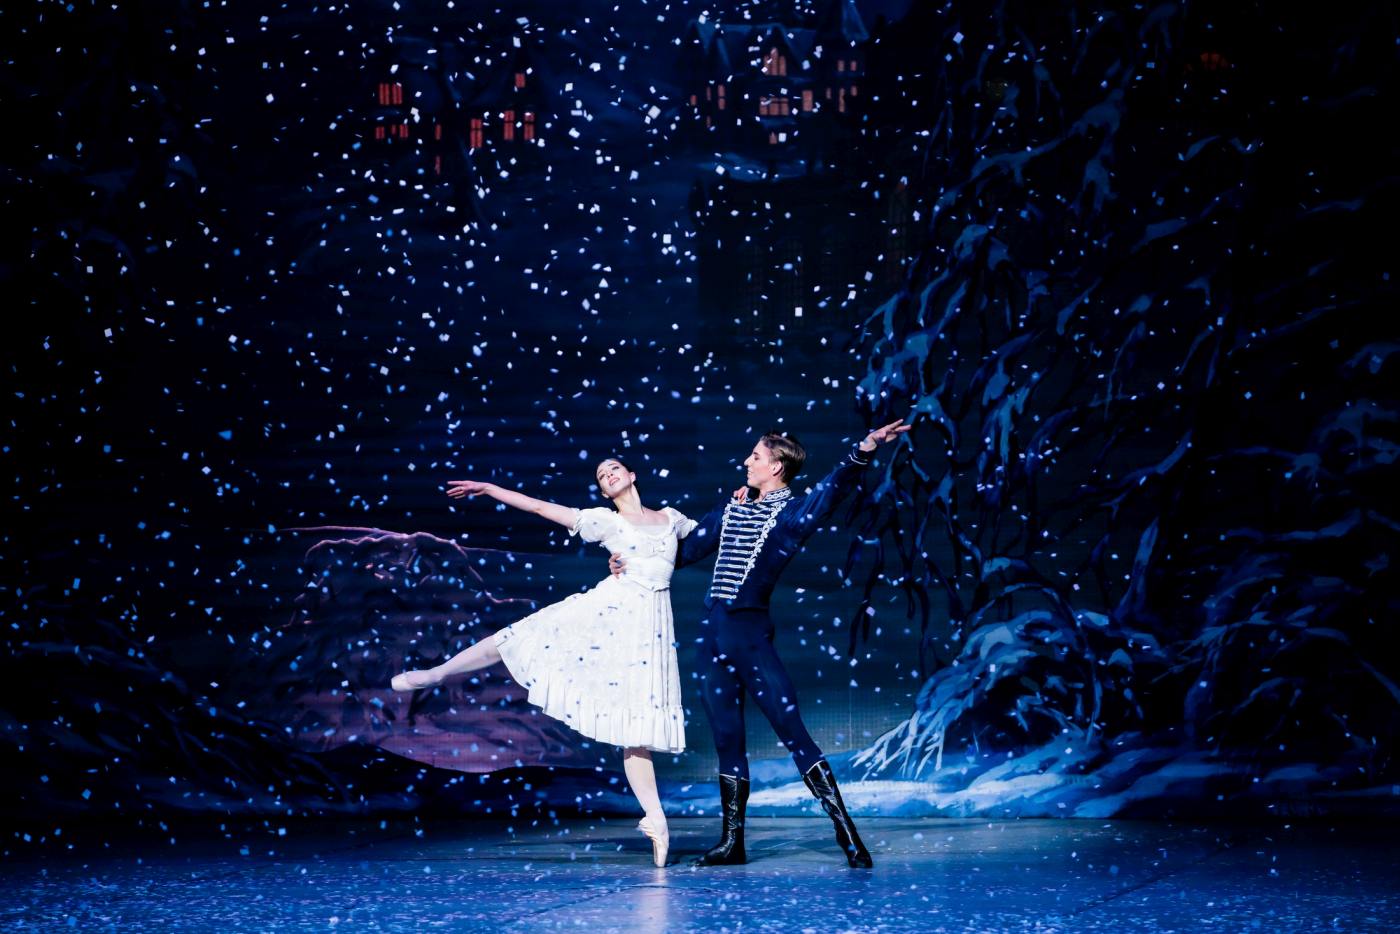 5. M.Beck (Marie) and G.Á.Balázsi (Prince), “The Nutcracker” by W.Eagling and T.Solymosi, Hungarian National Ballet & Hungarian National Ballet Institute 2022 © V.Berecz 